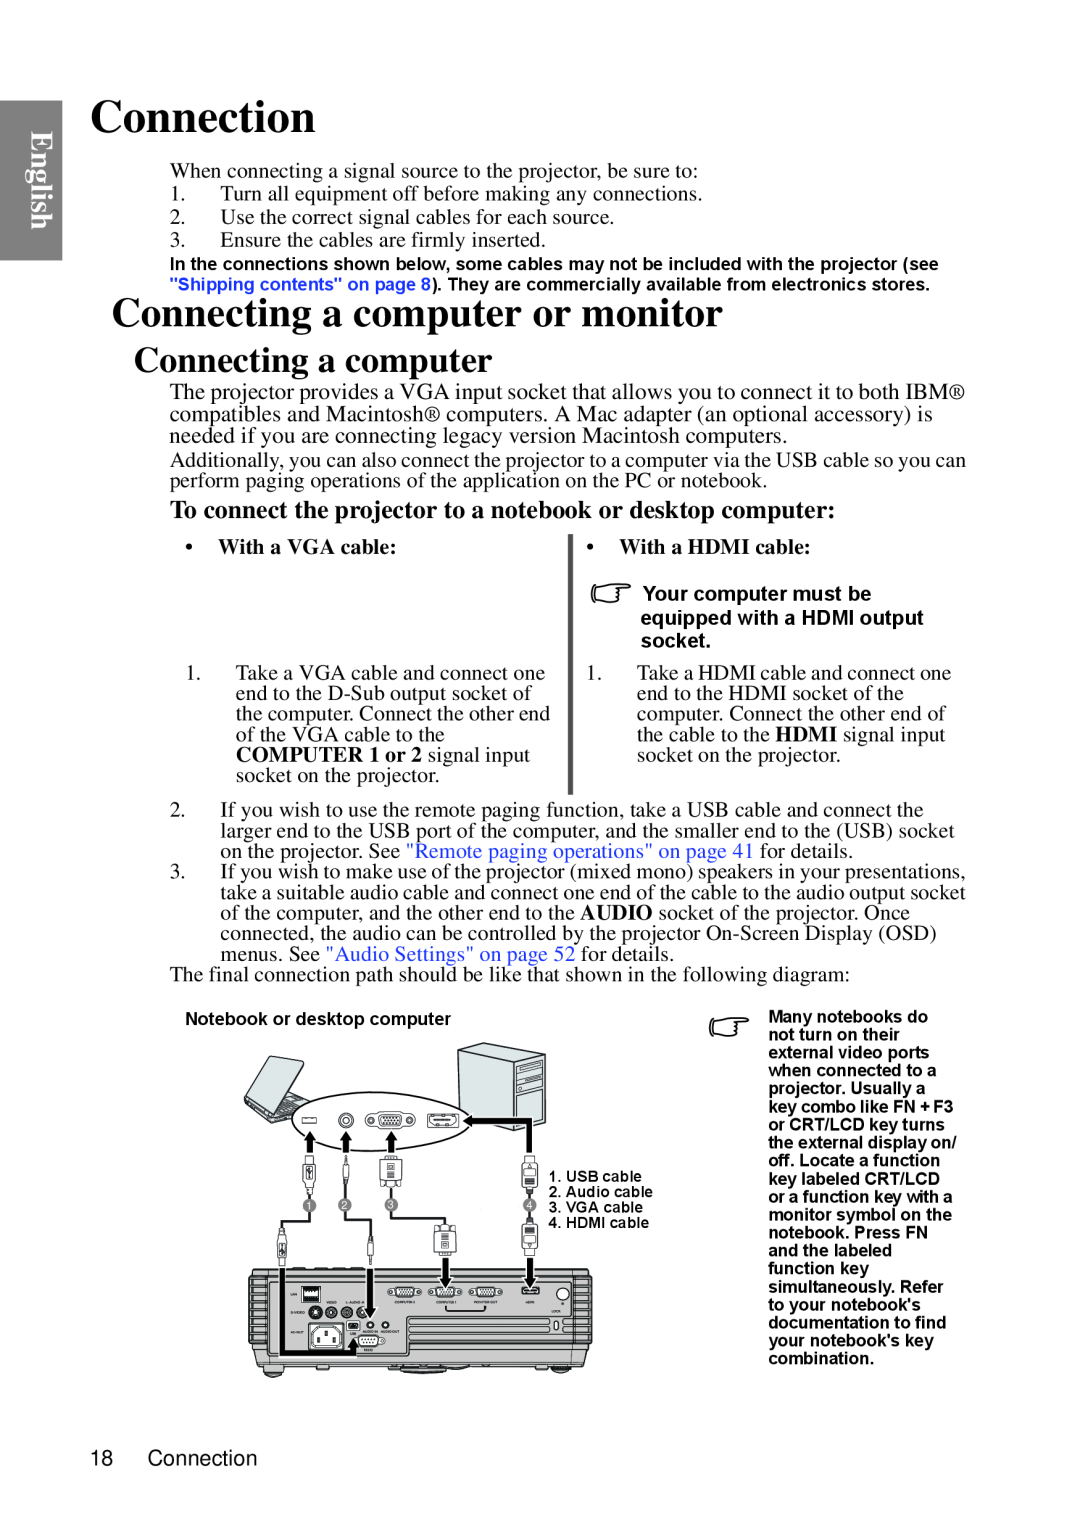 BenQ MP670 Connection, Connecting a computer or monitor, To connect the projector to a notebook or desktop computer 